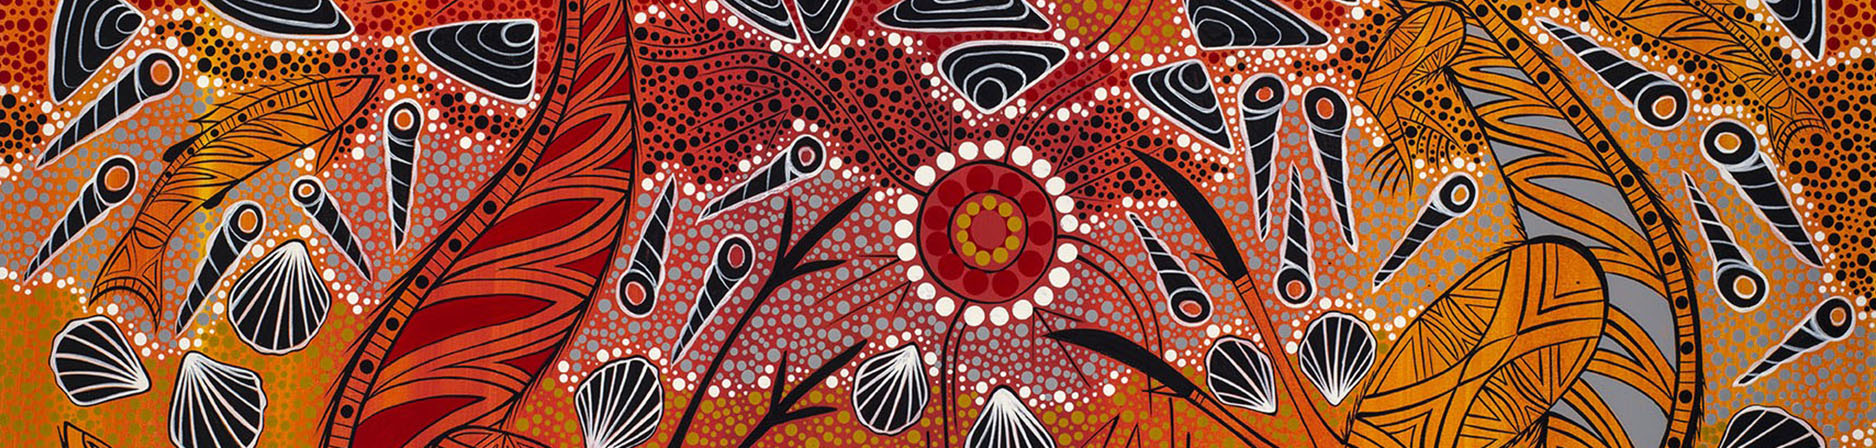 First Nations Artwork